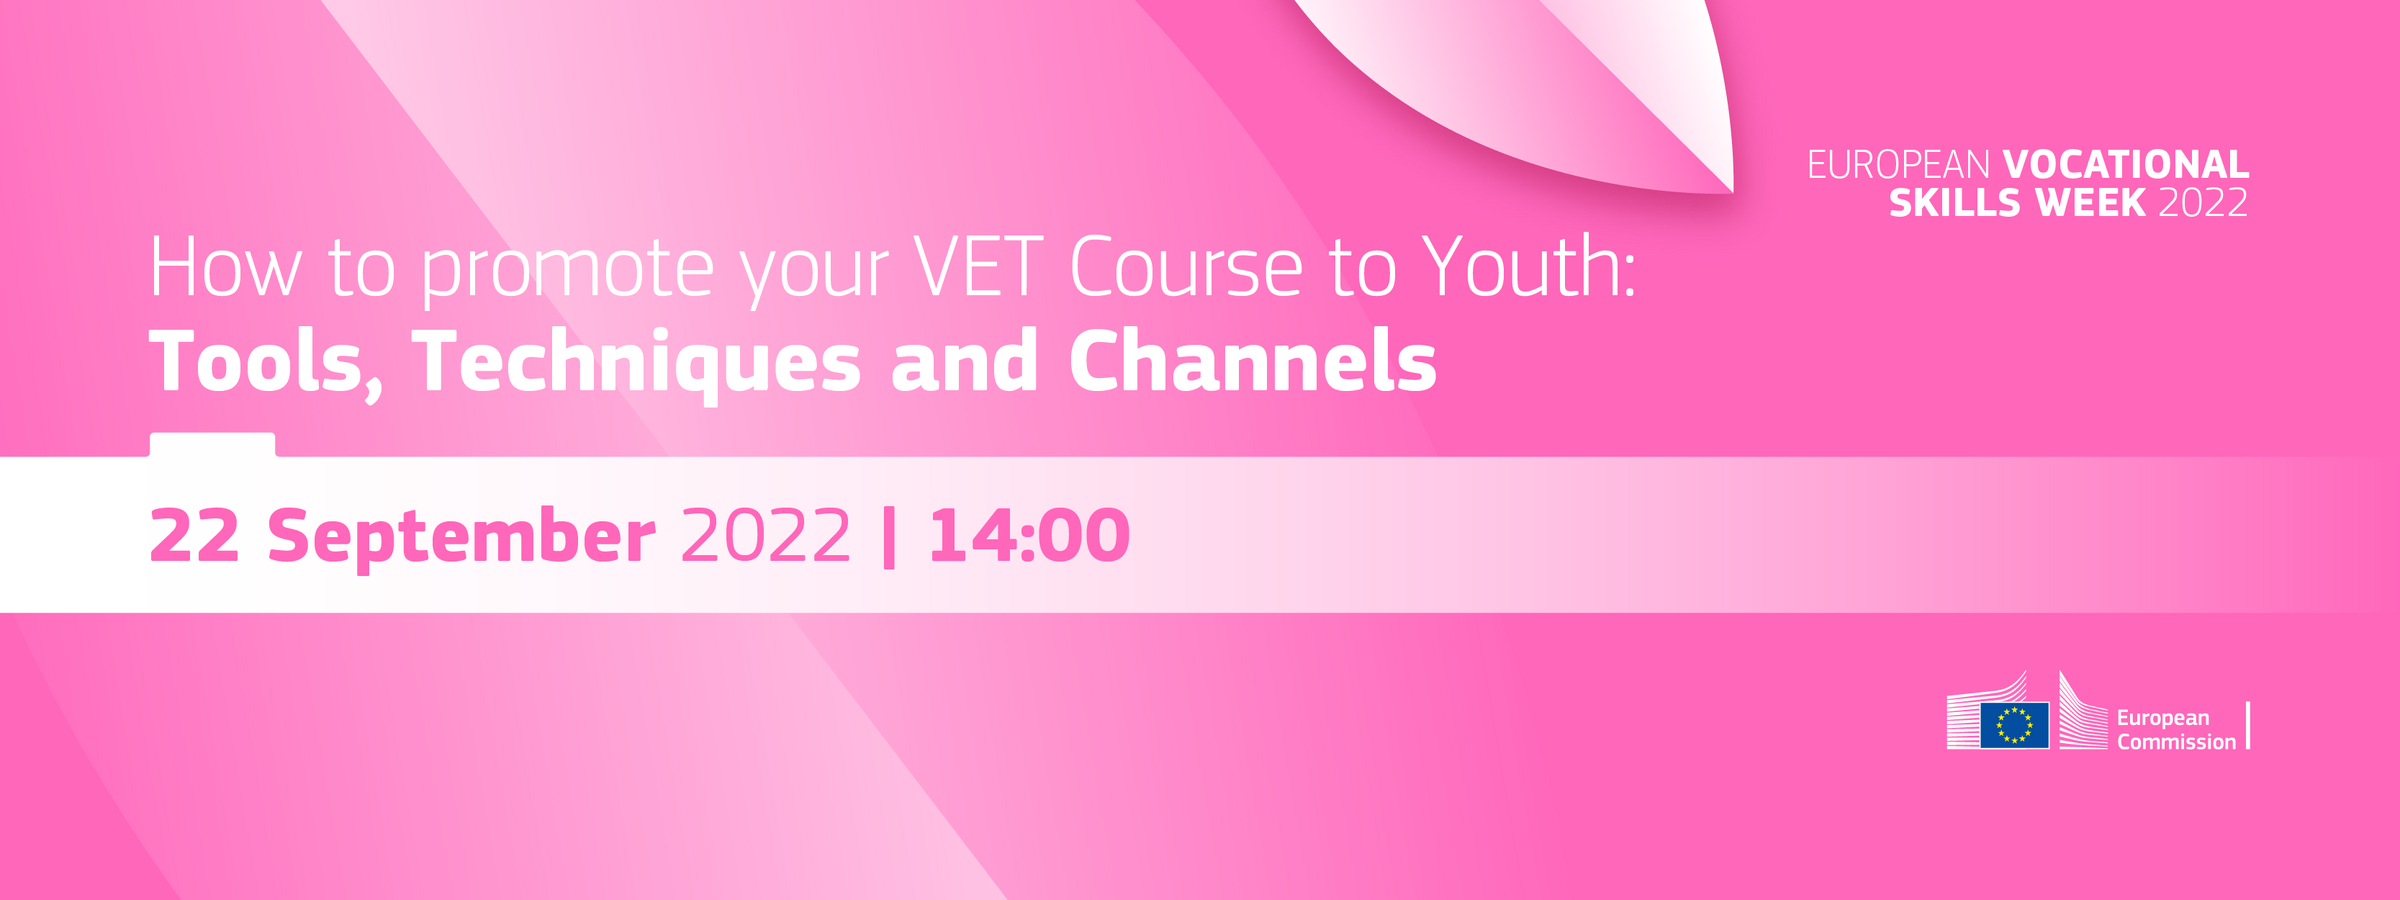 EVSW 2022 - Webinar: How to promote your VET Course to Youth: Tools, Techniques and Channels